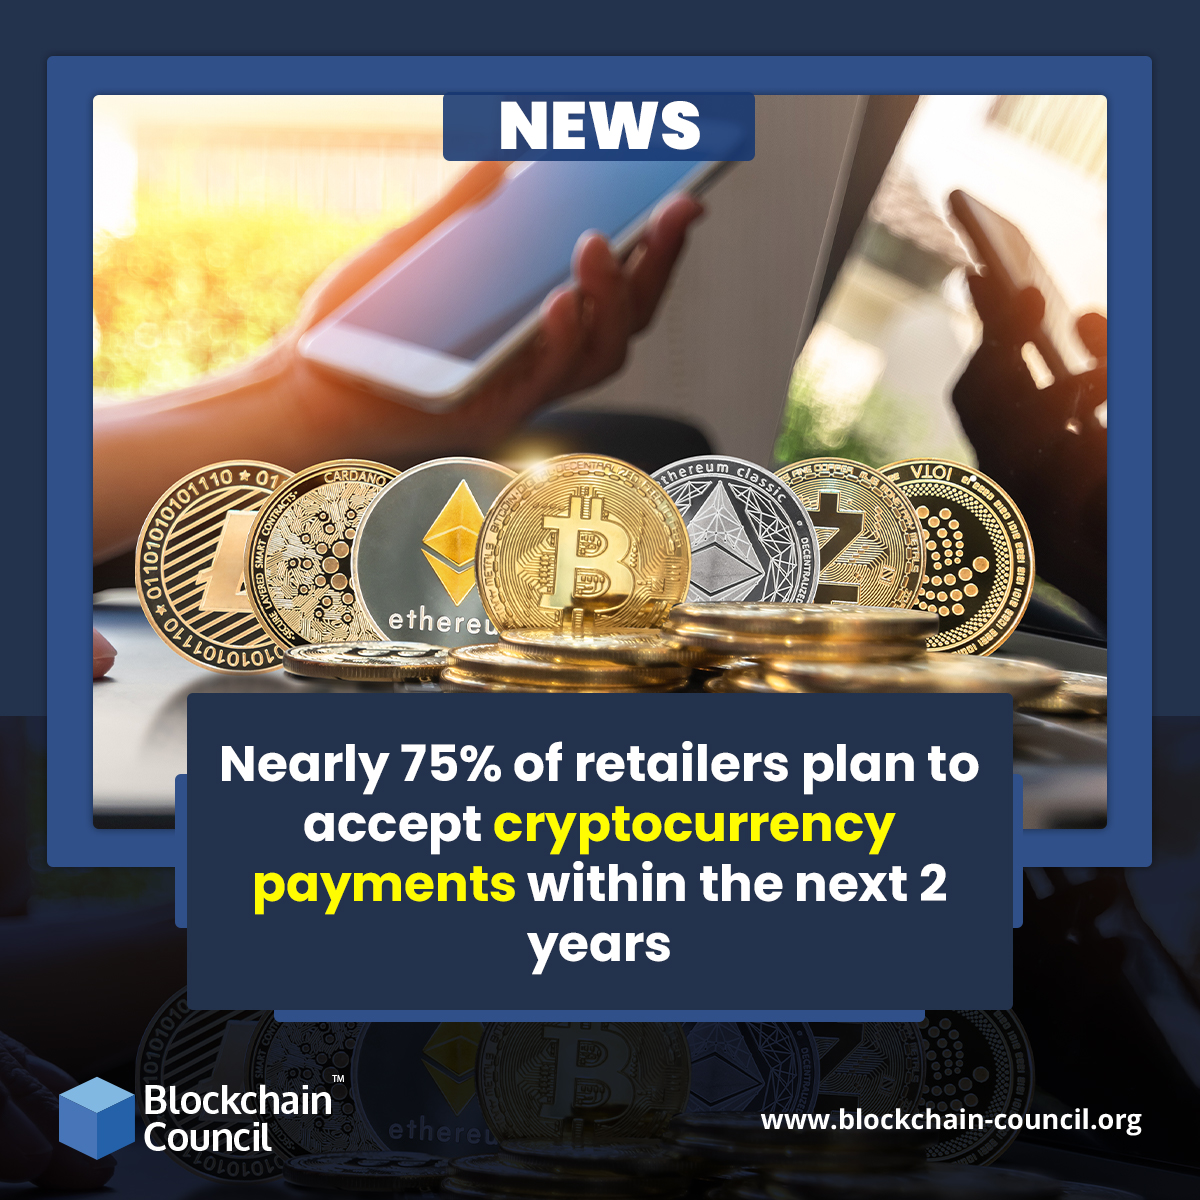 Nearly 75% of retailers plan to accept cryptocurrency payments within the next 2 years